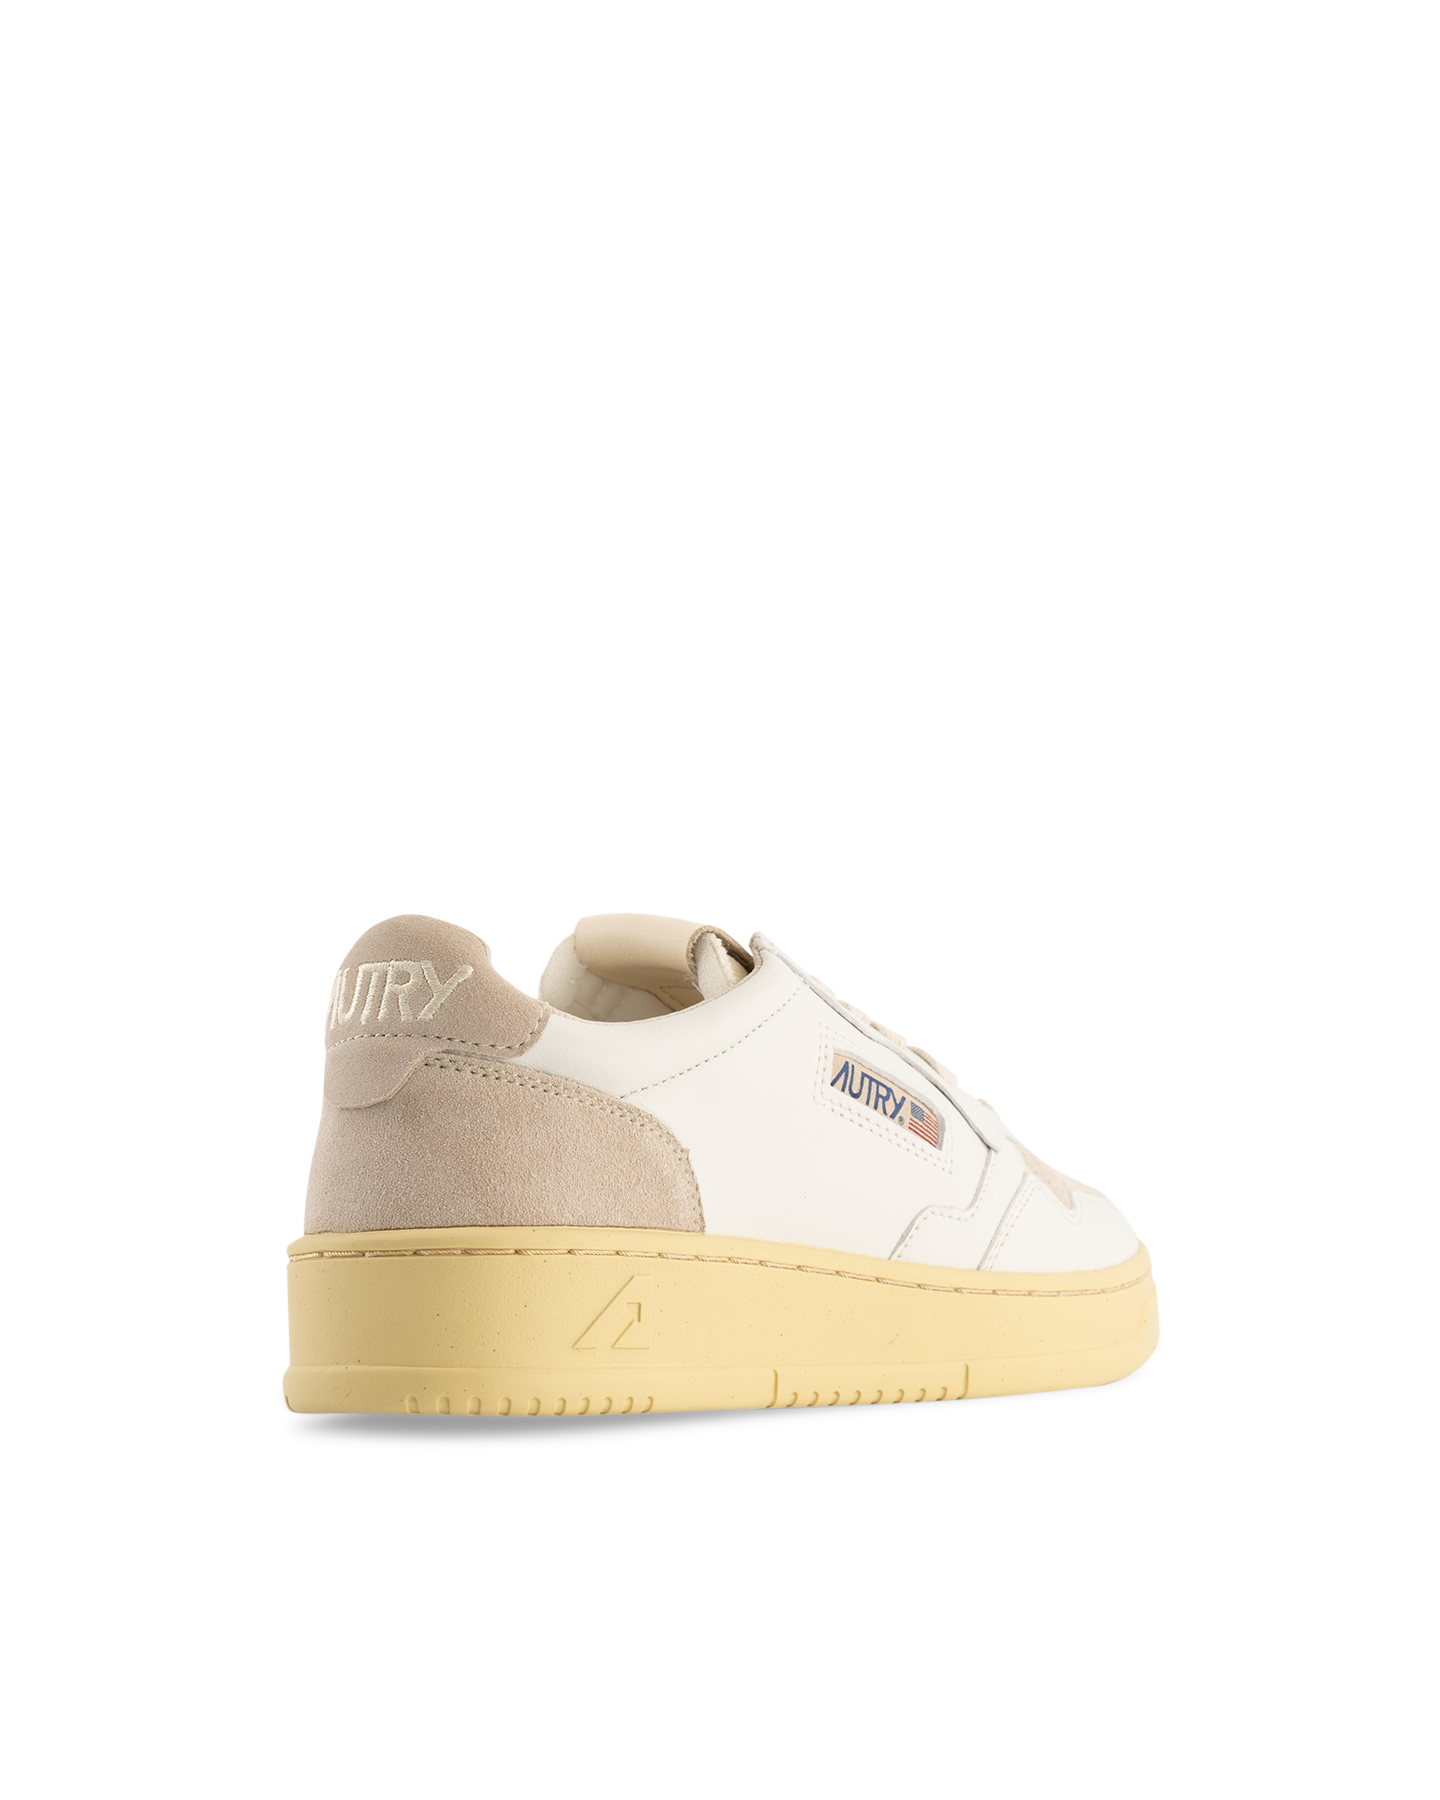 Autry Action Autry 01 Low Wom Suede/Leat Wht/Sand White 3